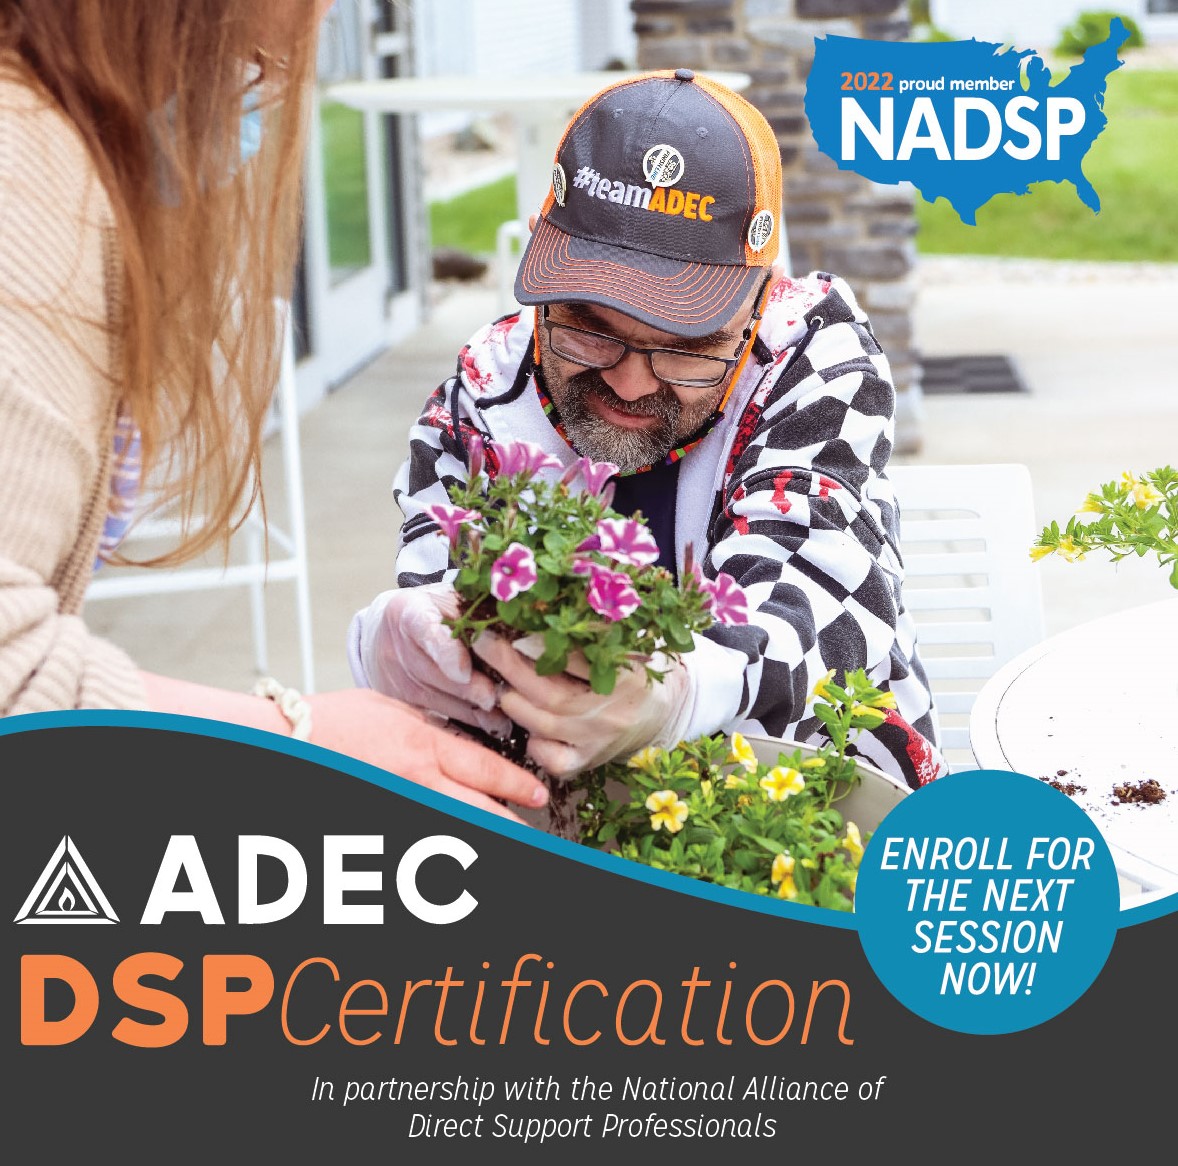 ADEC Introduces New National DSP Certification Program